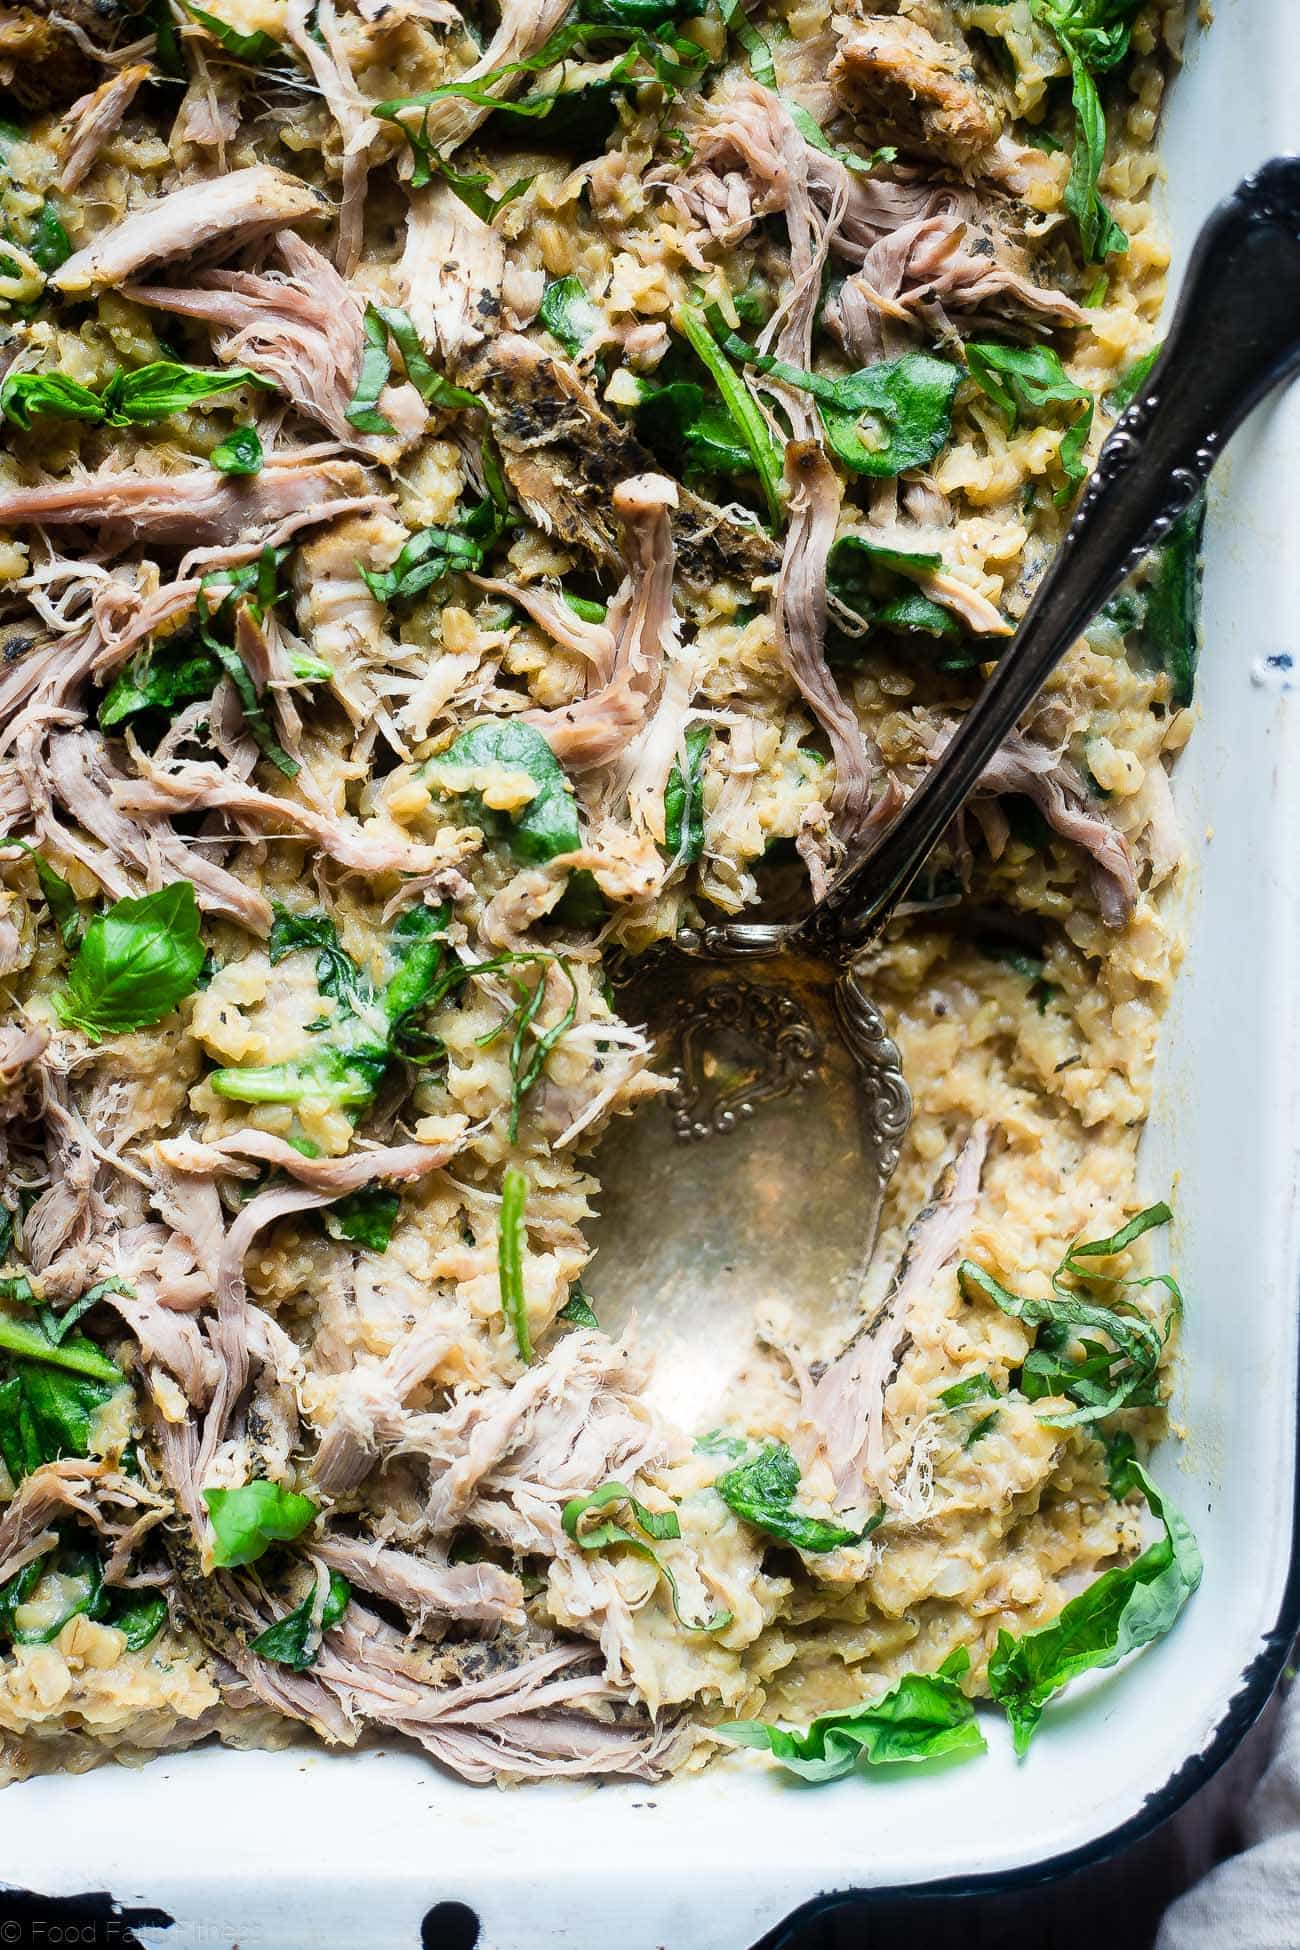 Slow Cooker Honey Mustard Pork and Rice - Let the slow cooker do the work for you with this healthy honey mustard slow cooker pork loin and rice that's gluten free, under 10 ingredients and so easy! | Foodfaithfitness.com | @FoodFaithFit